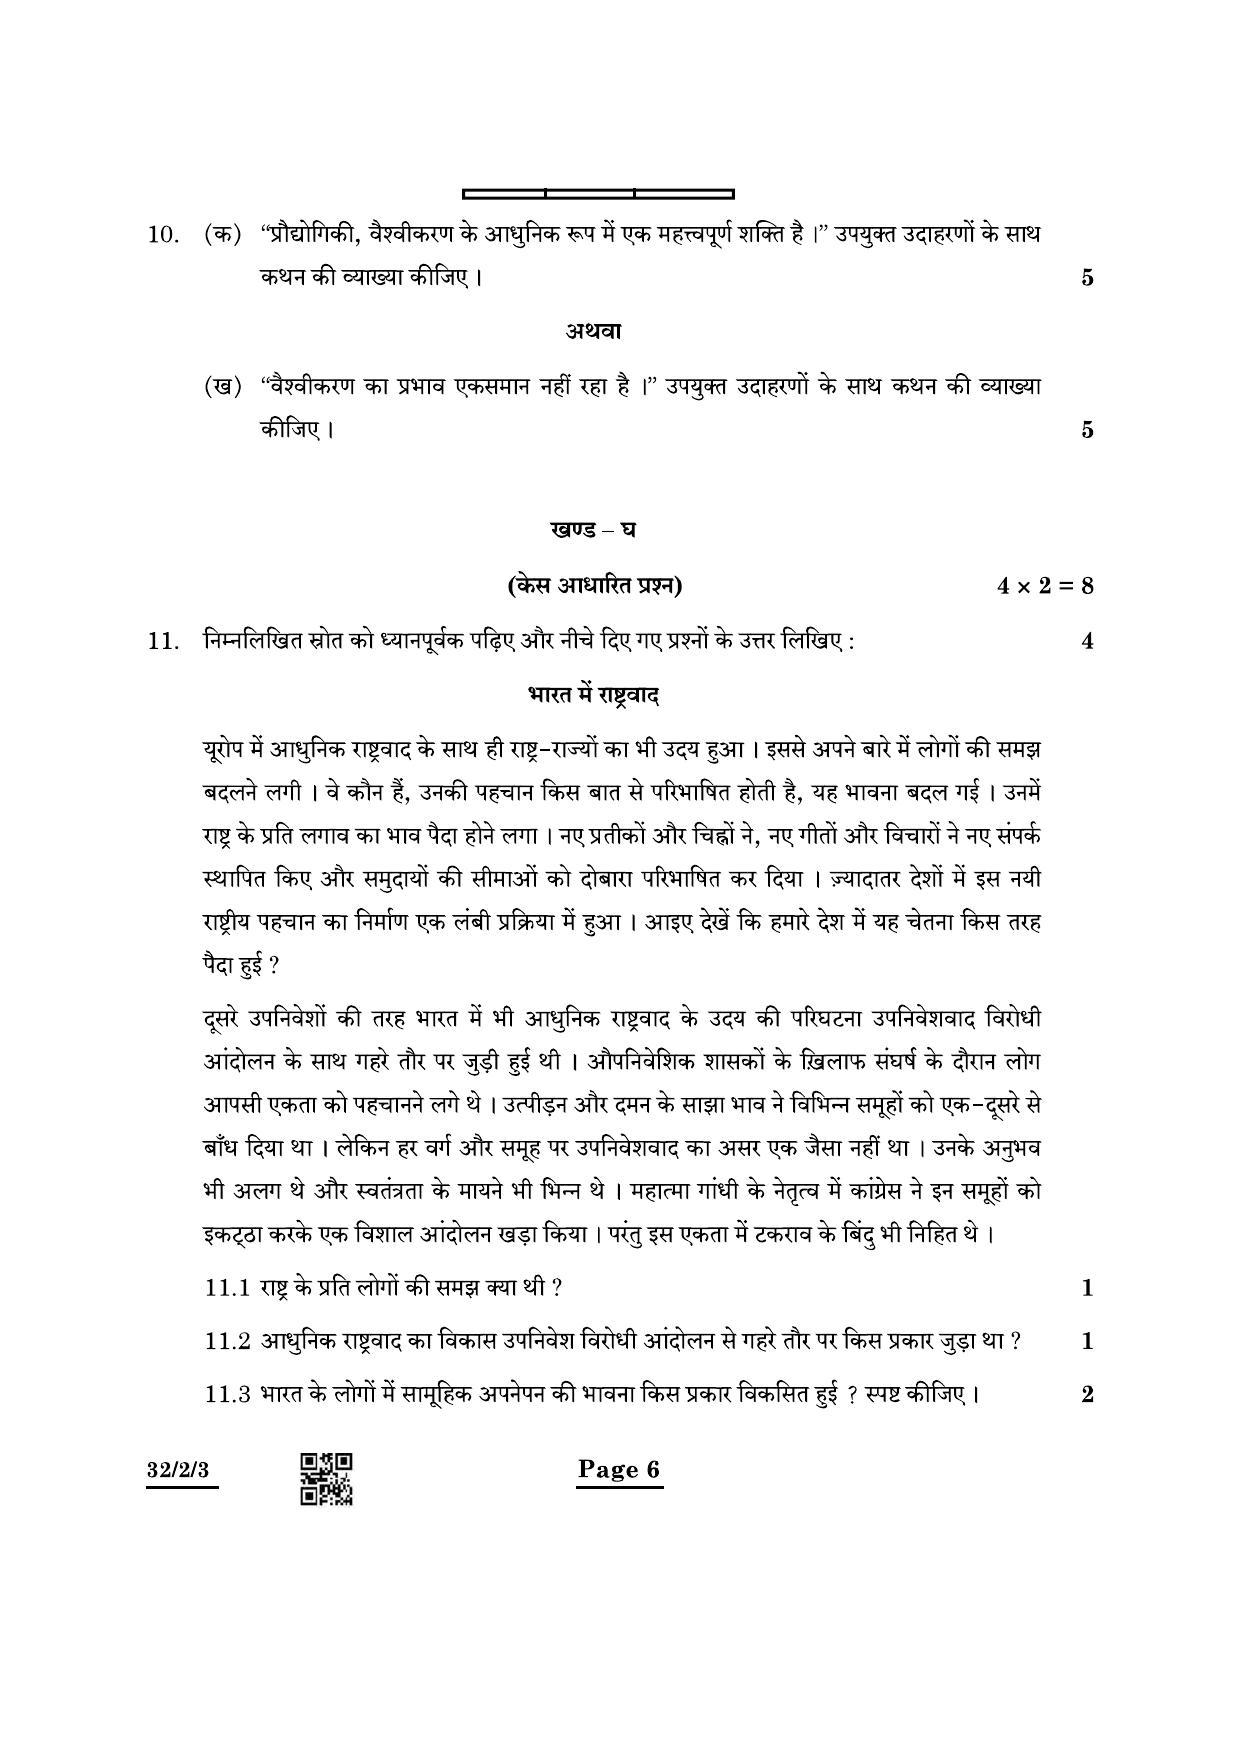 CBSE Class 10 32-2-3 Social Science 2022 Question Paper - Page 6